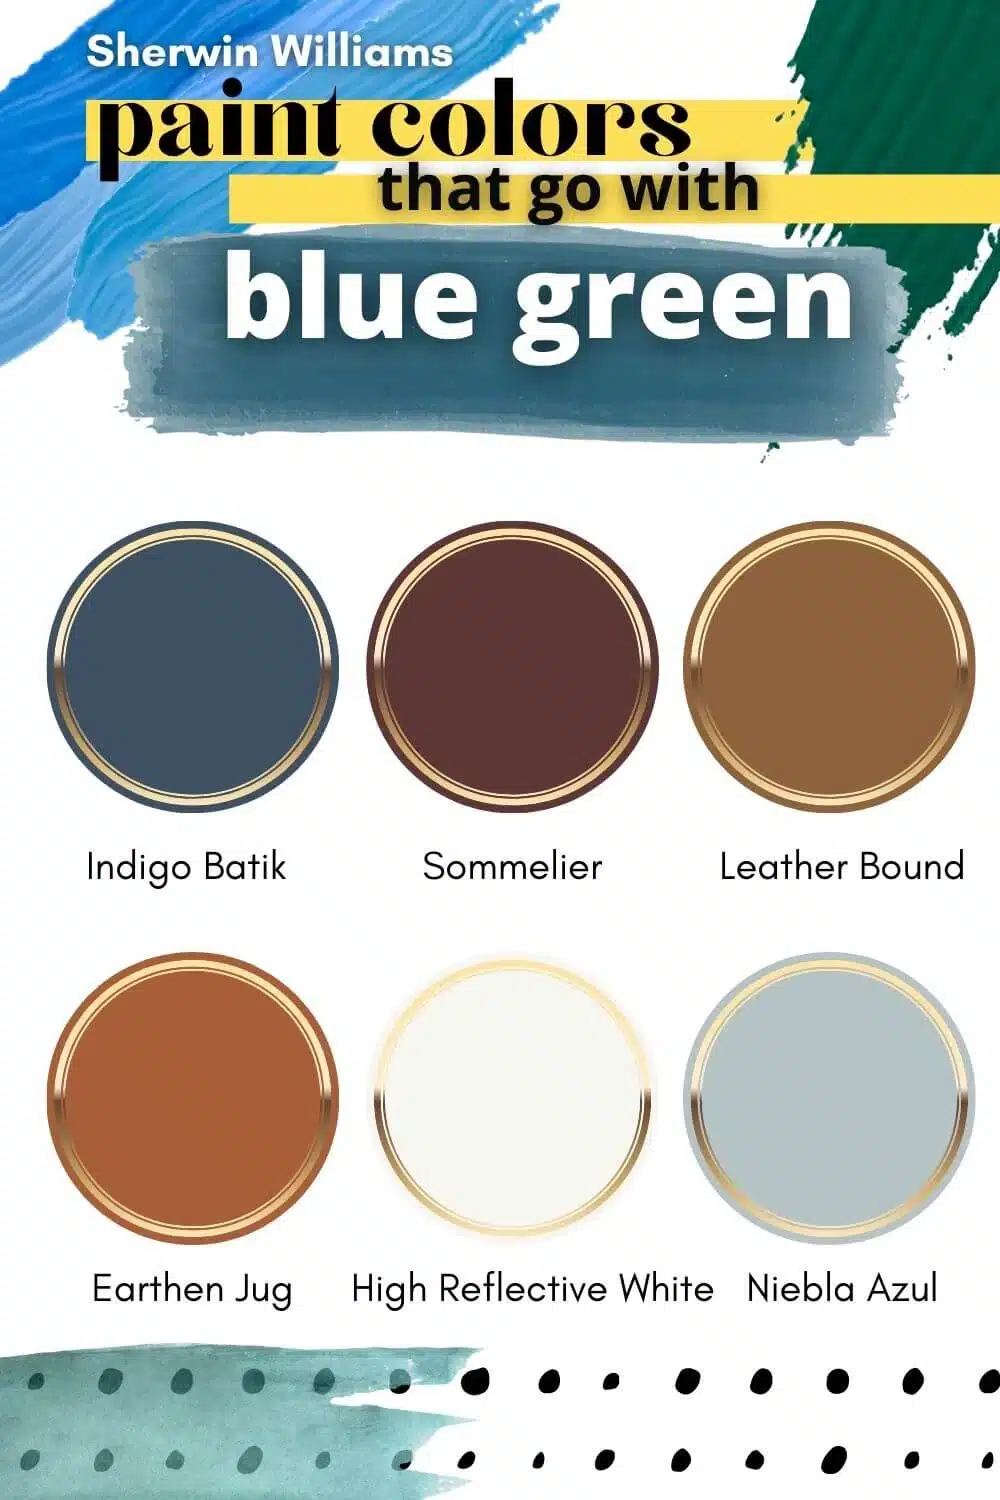 Sherwin Williams paint colors that go with blue green with 6 different colors